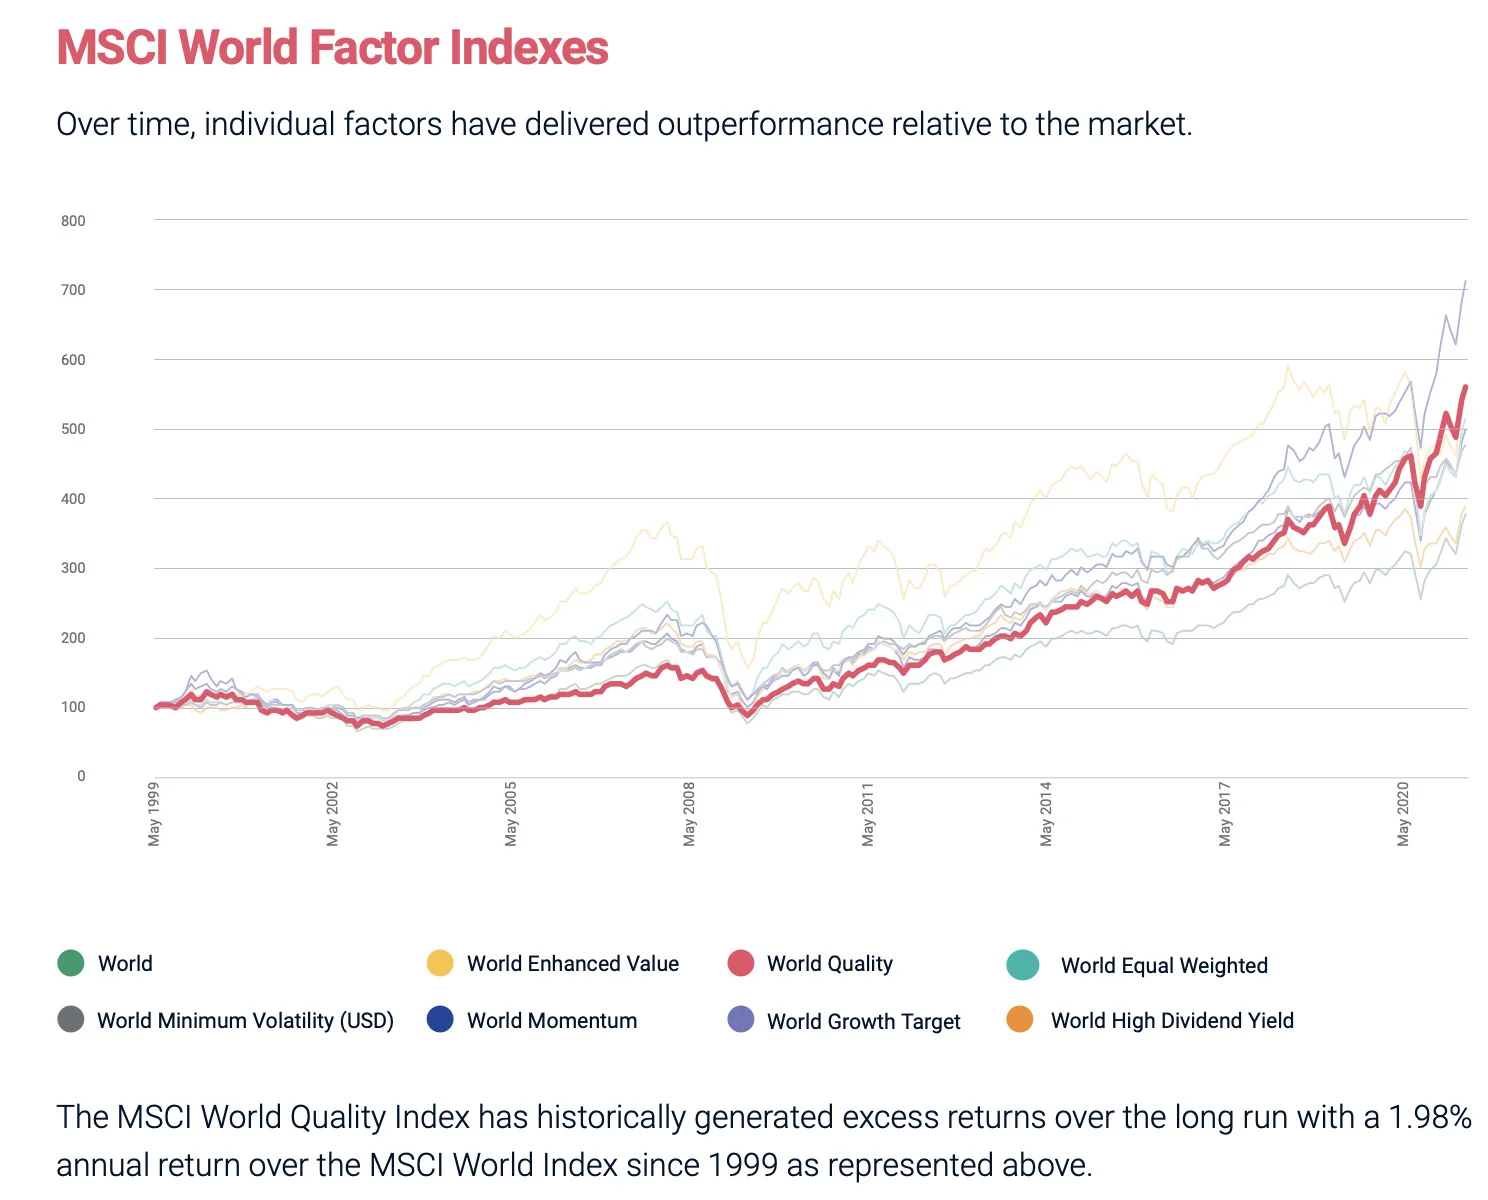 World Momentum Performance vs Other Factors from 1999 until 2020